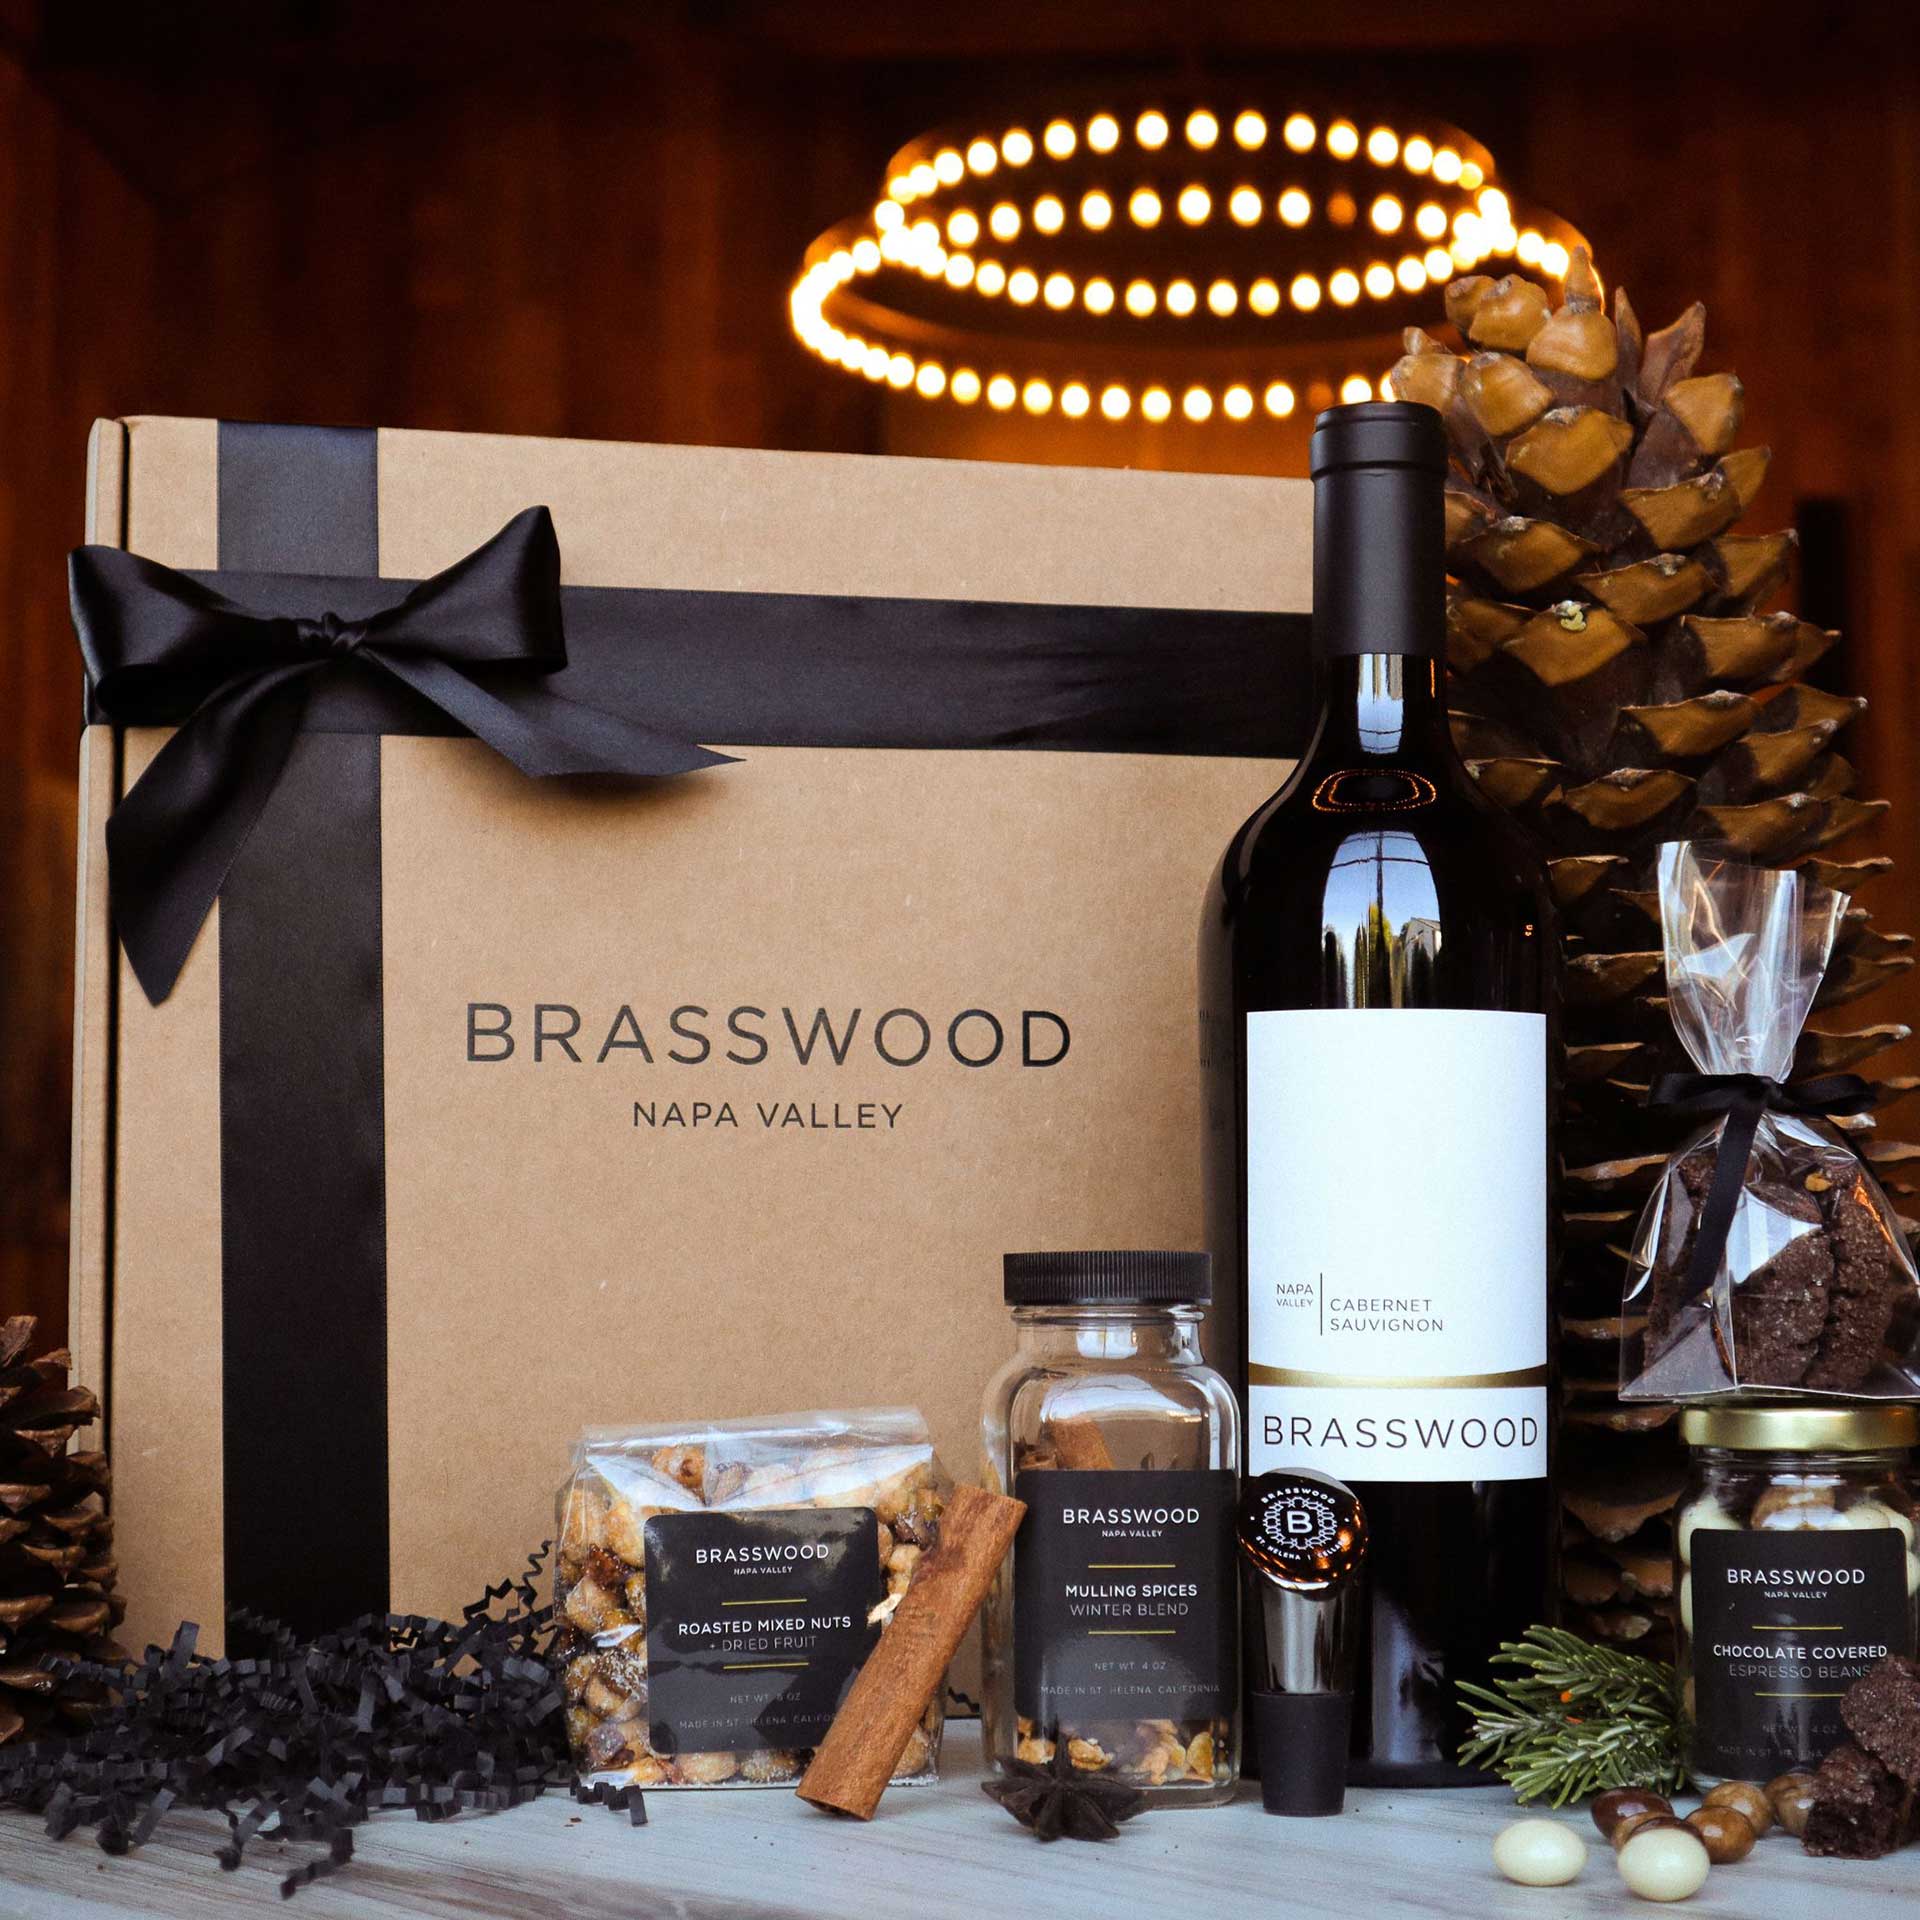 A photograph of the Brasswood holiday winter box with Cabernet Sauvignon, and other gift accessories in glass jars and vacuum-sealed snacks.